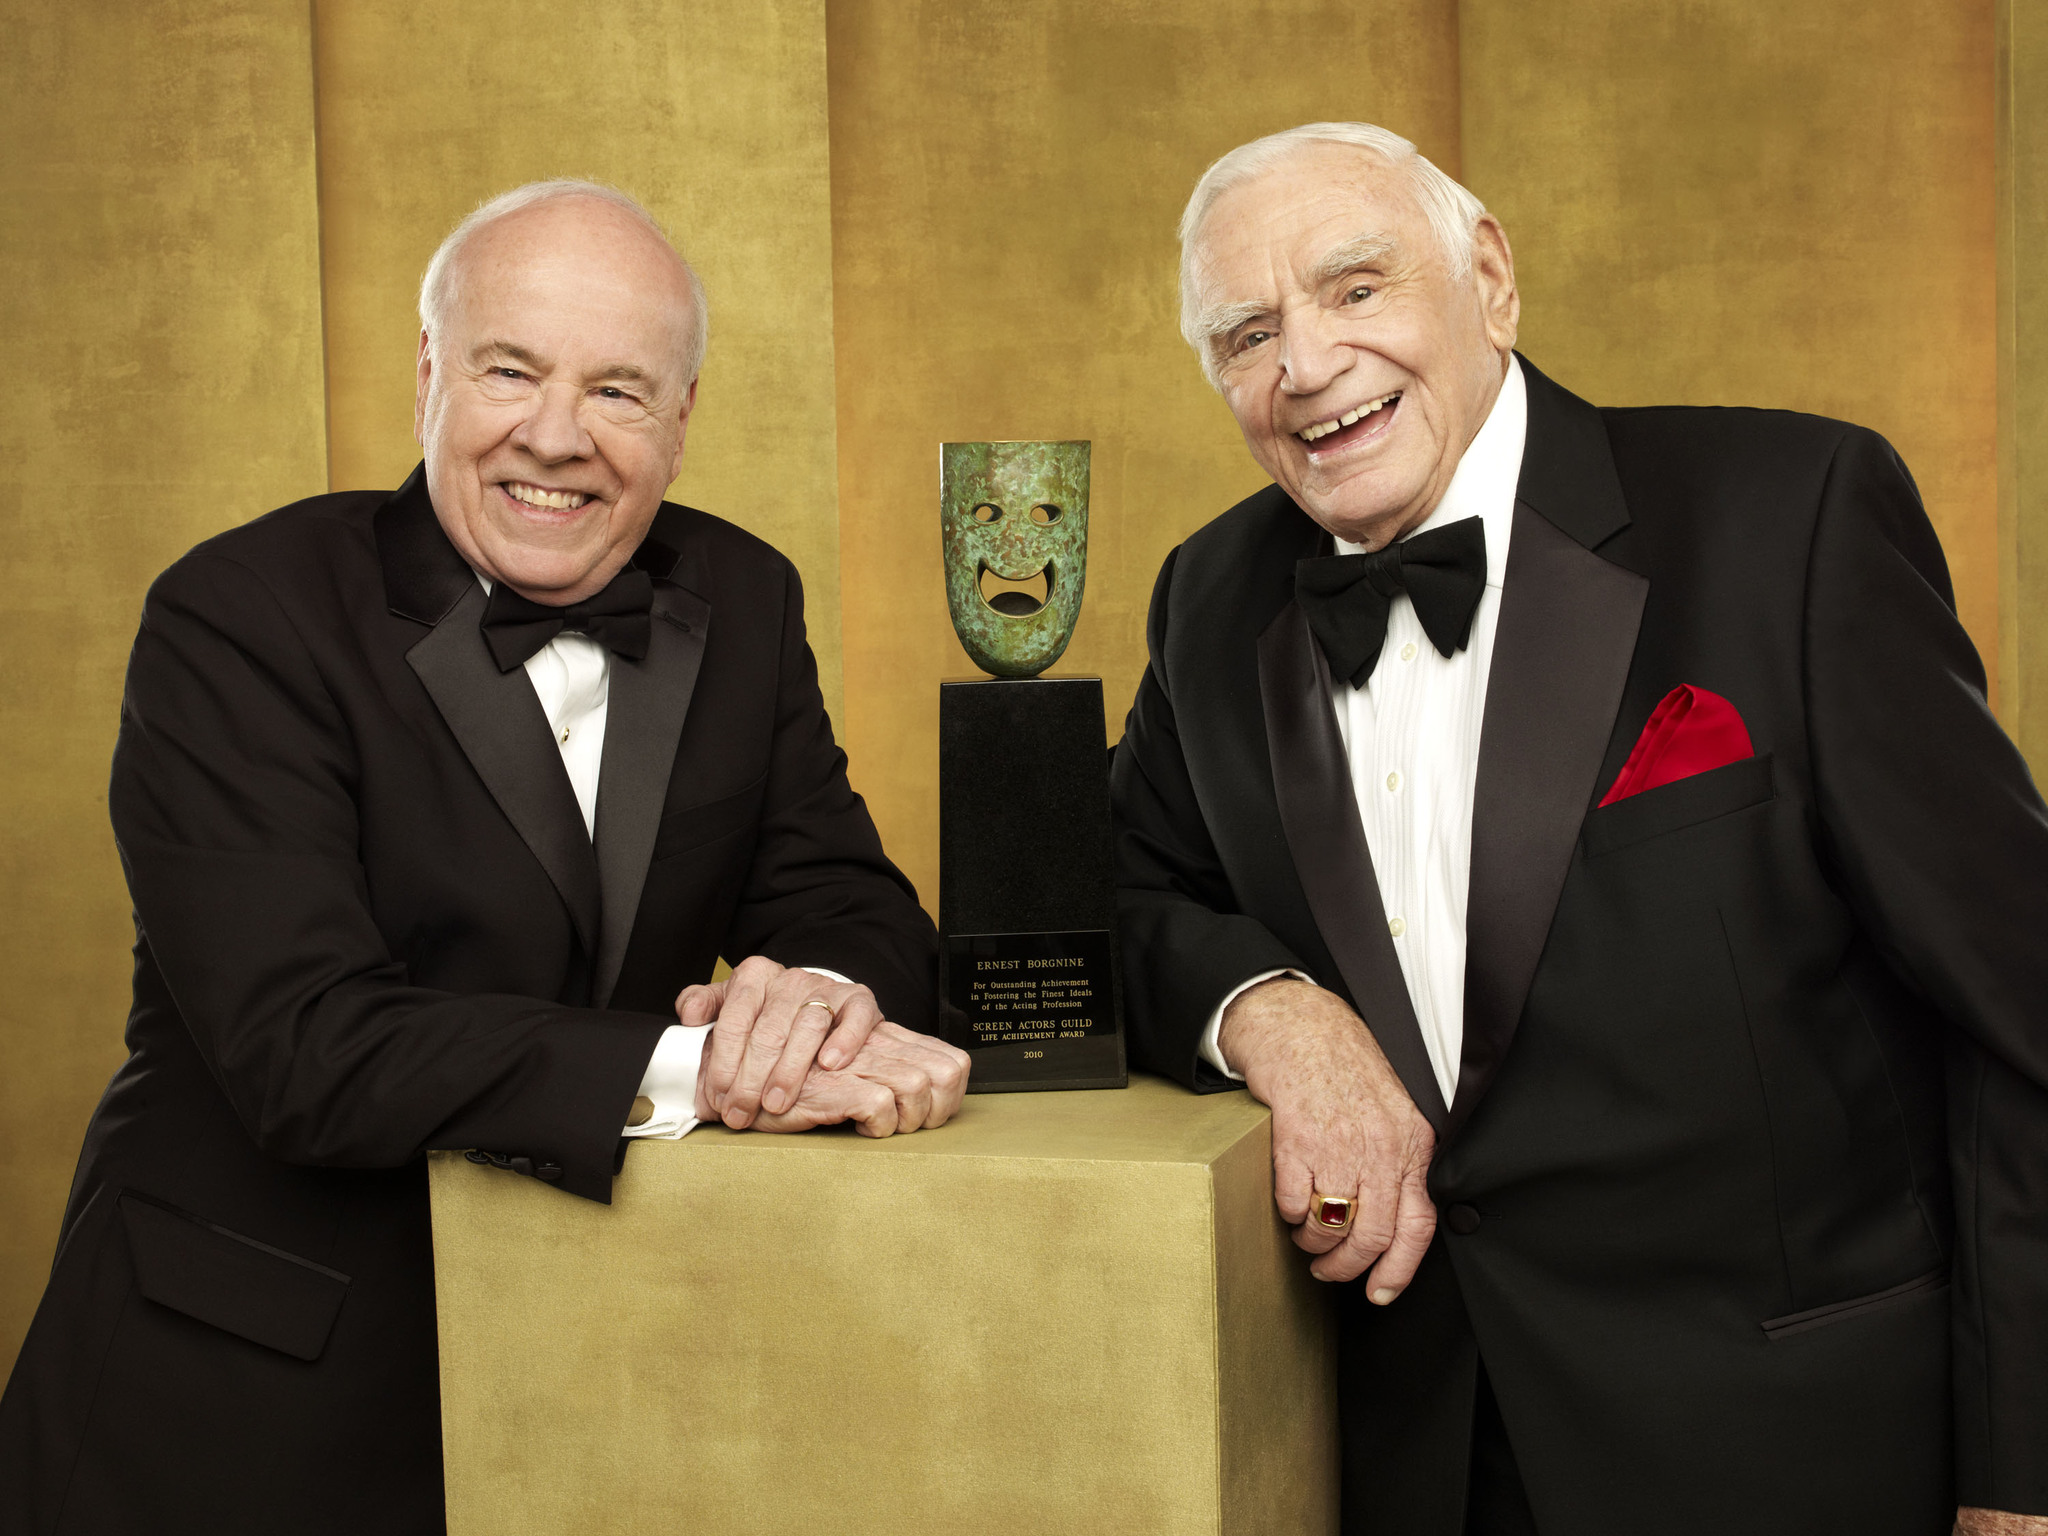 Ernest Borgnine and Tim Conway